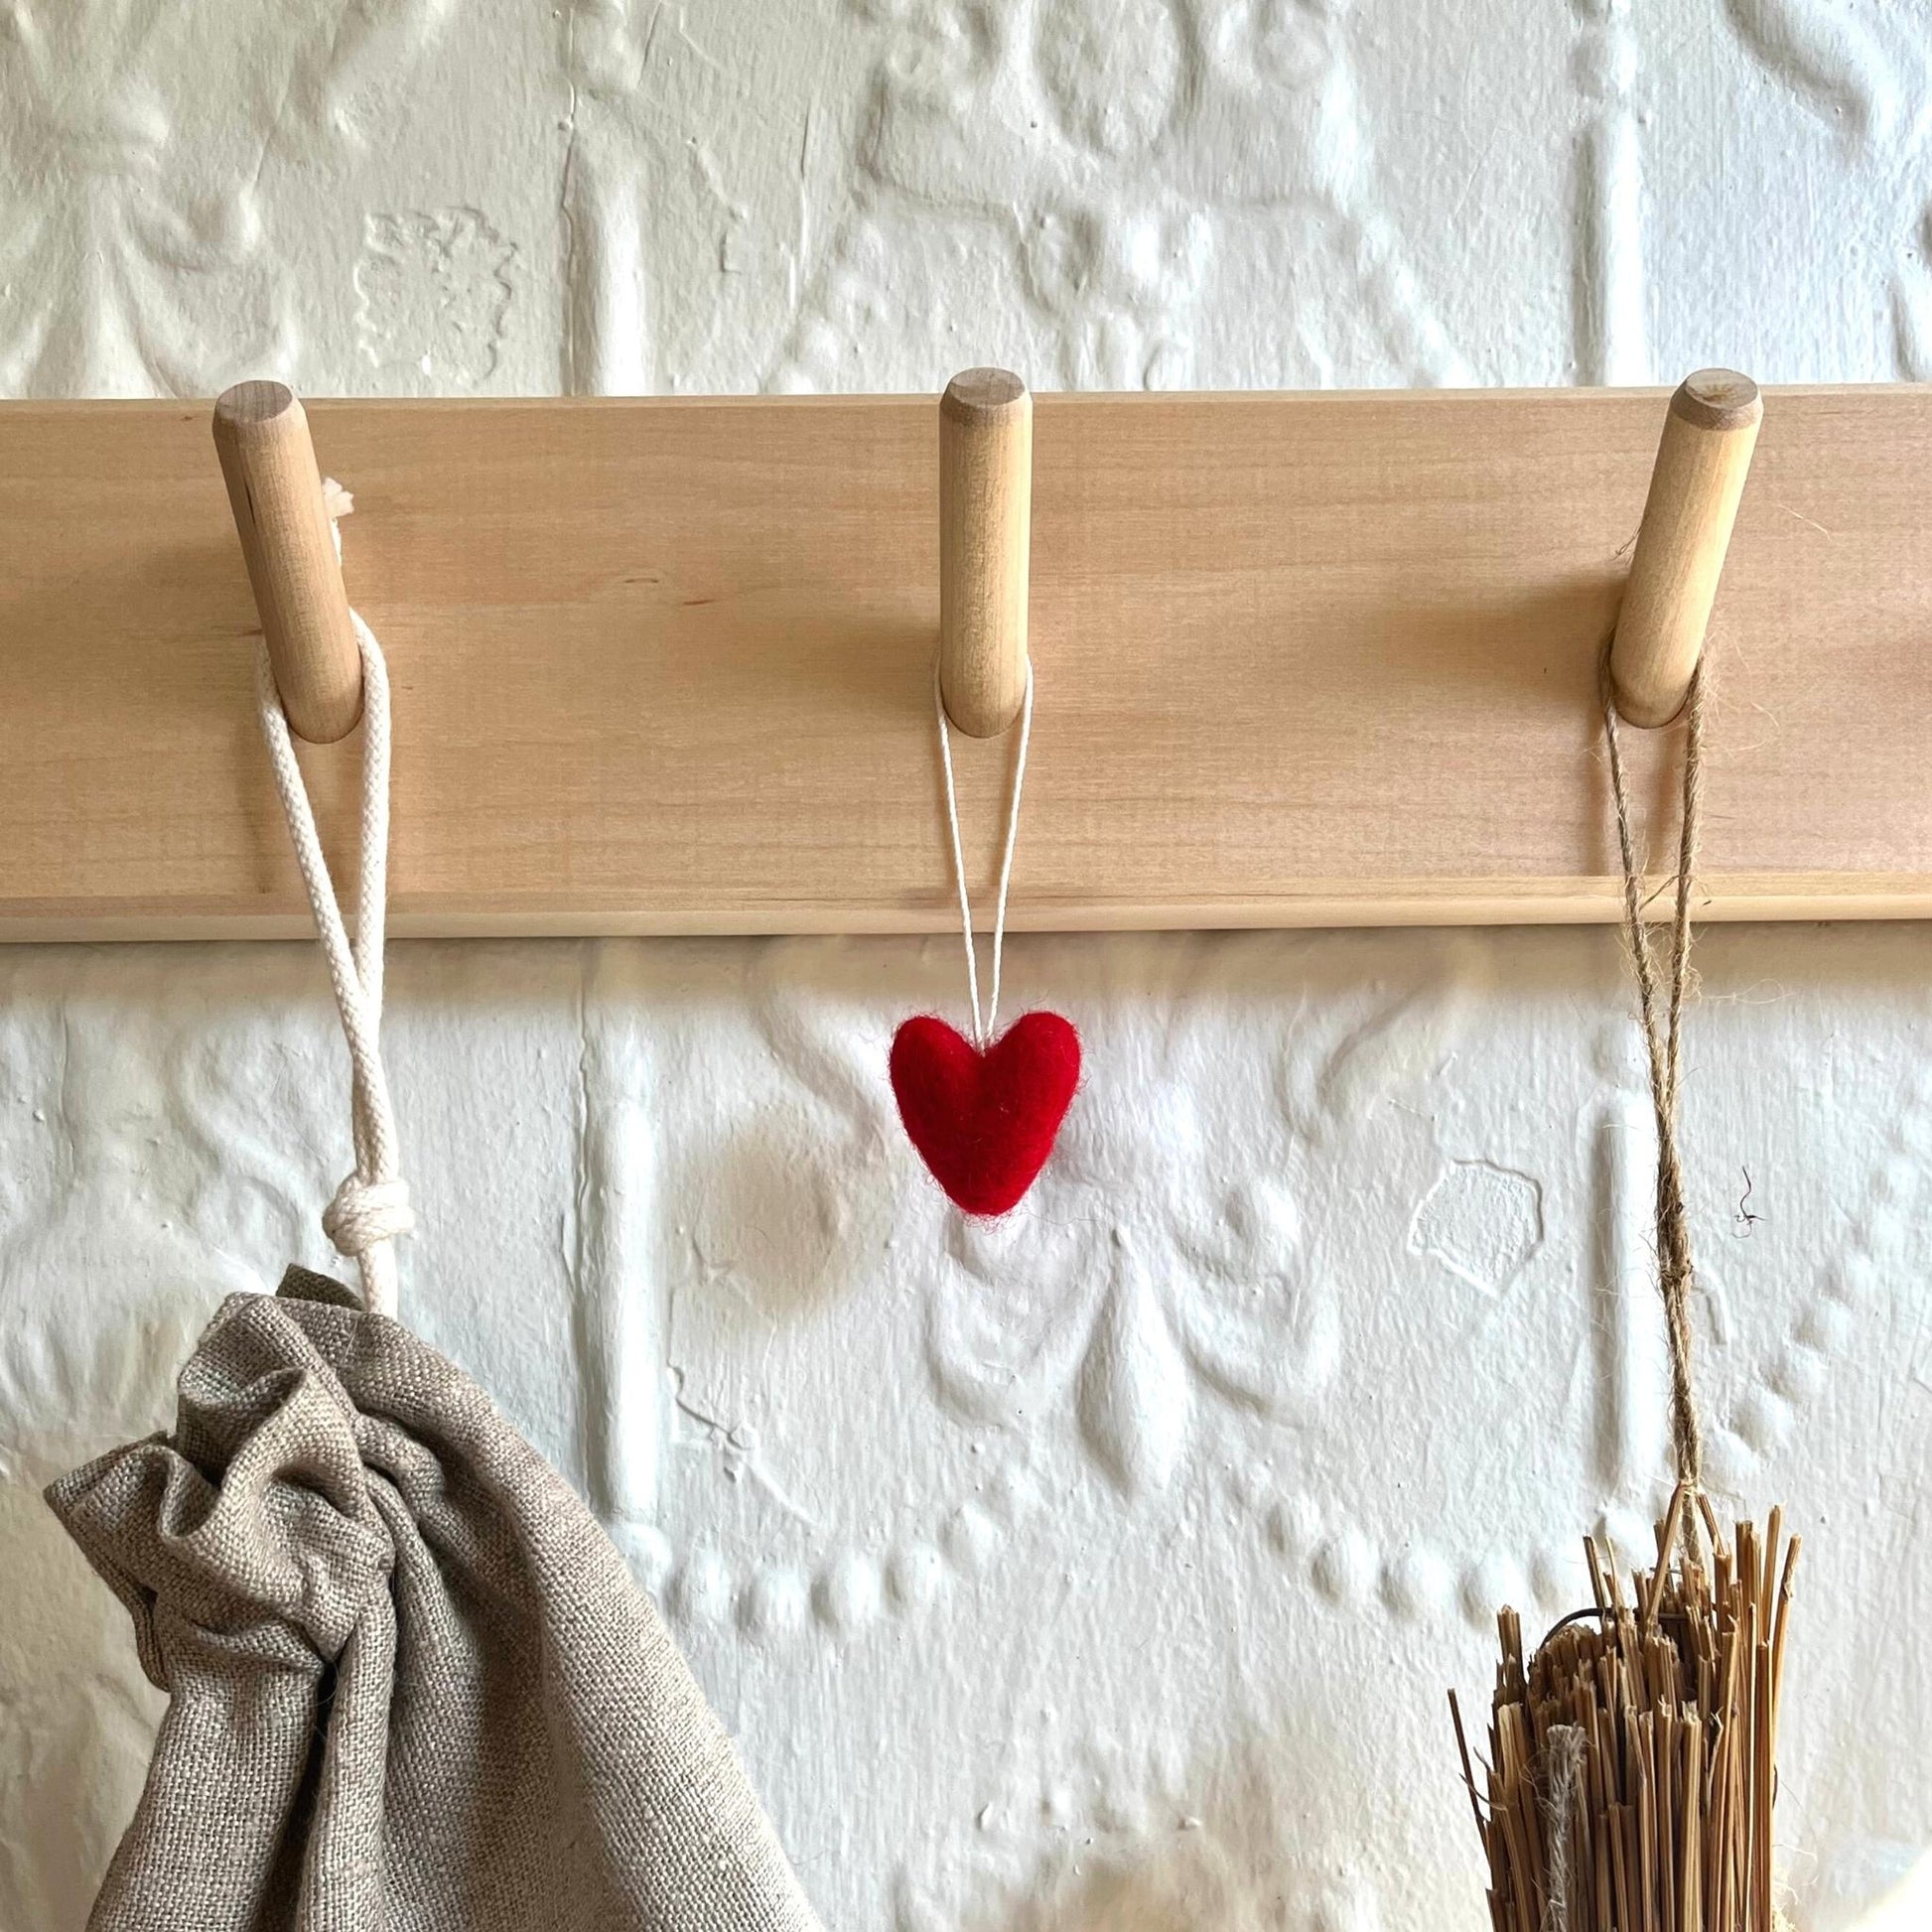 Handmade felted wool red hearts hanging on wall rail of hooks